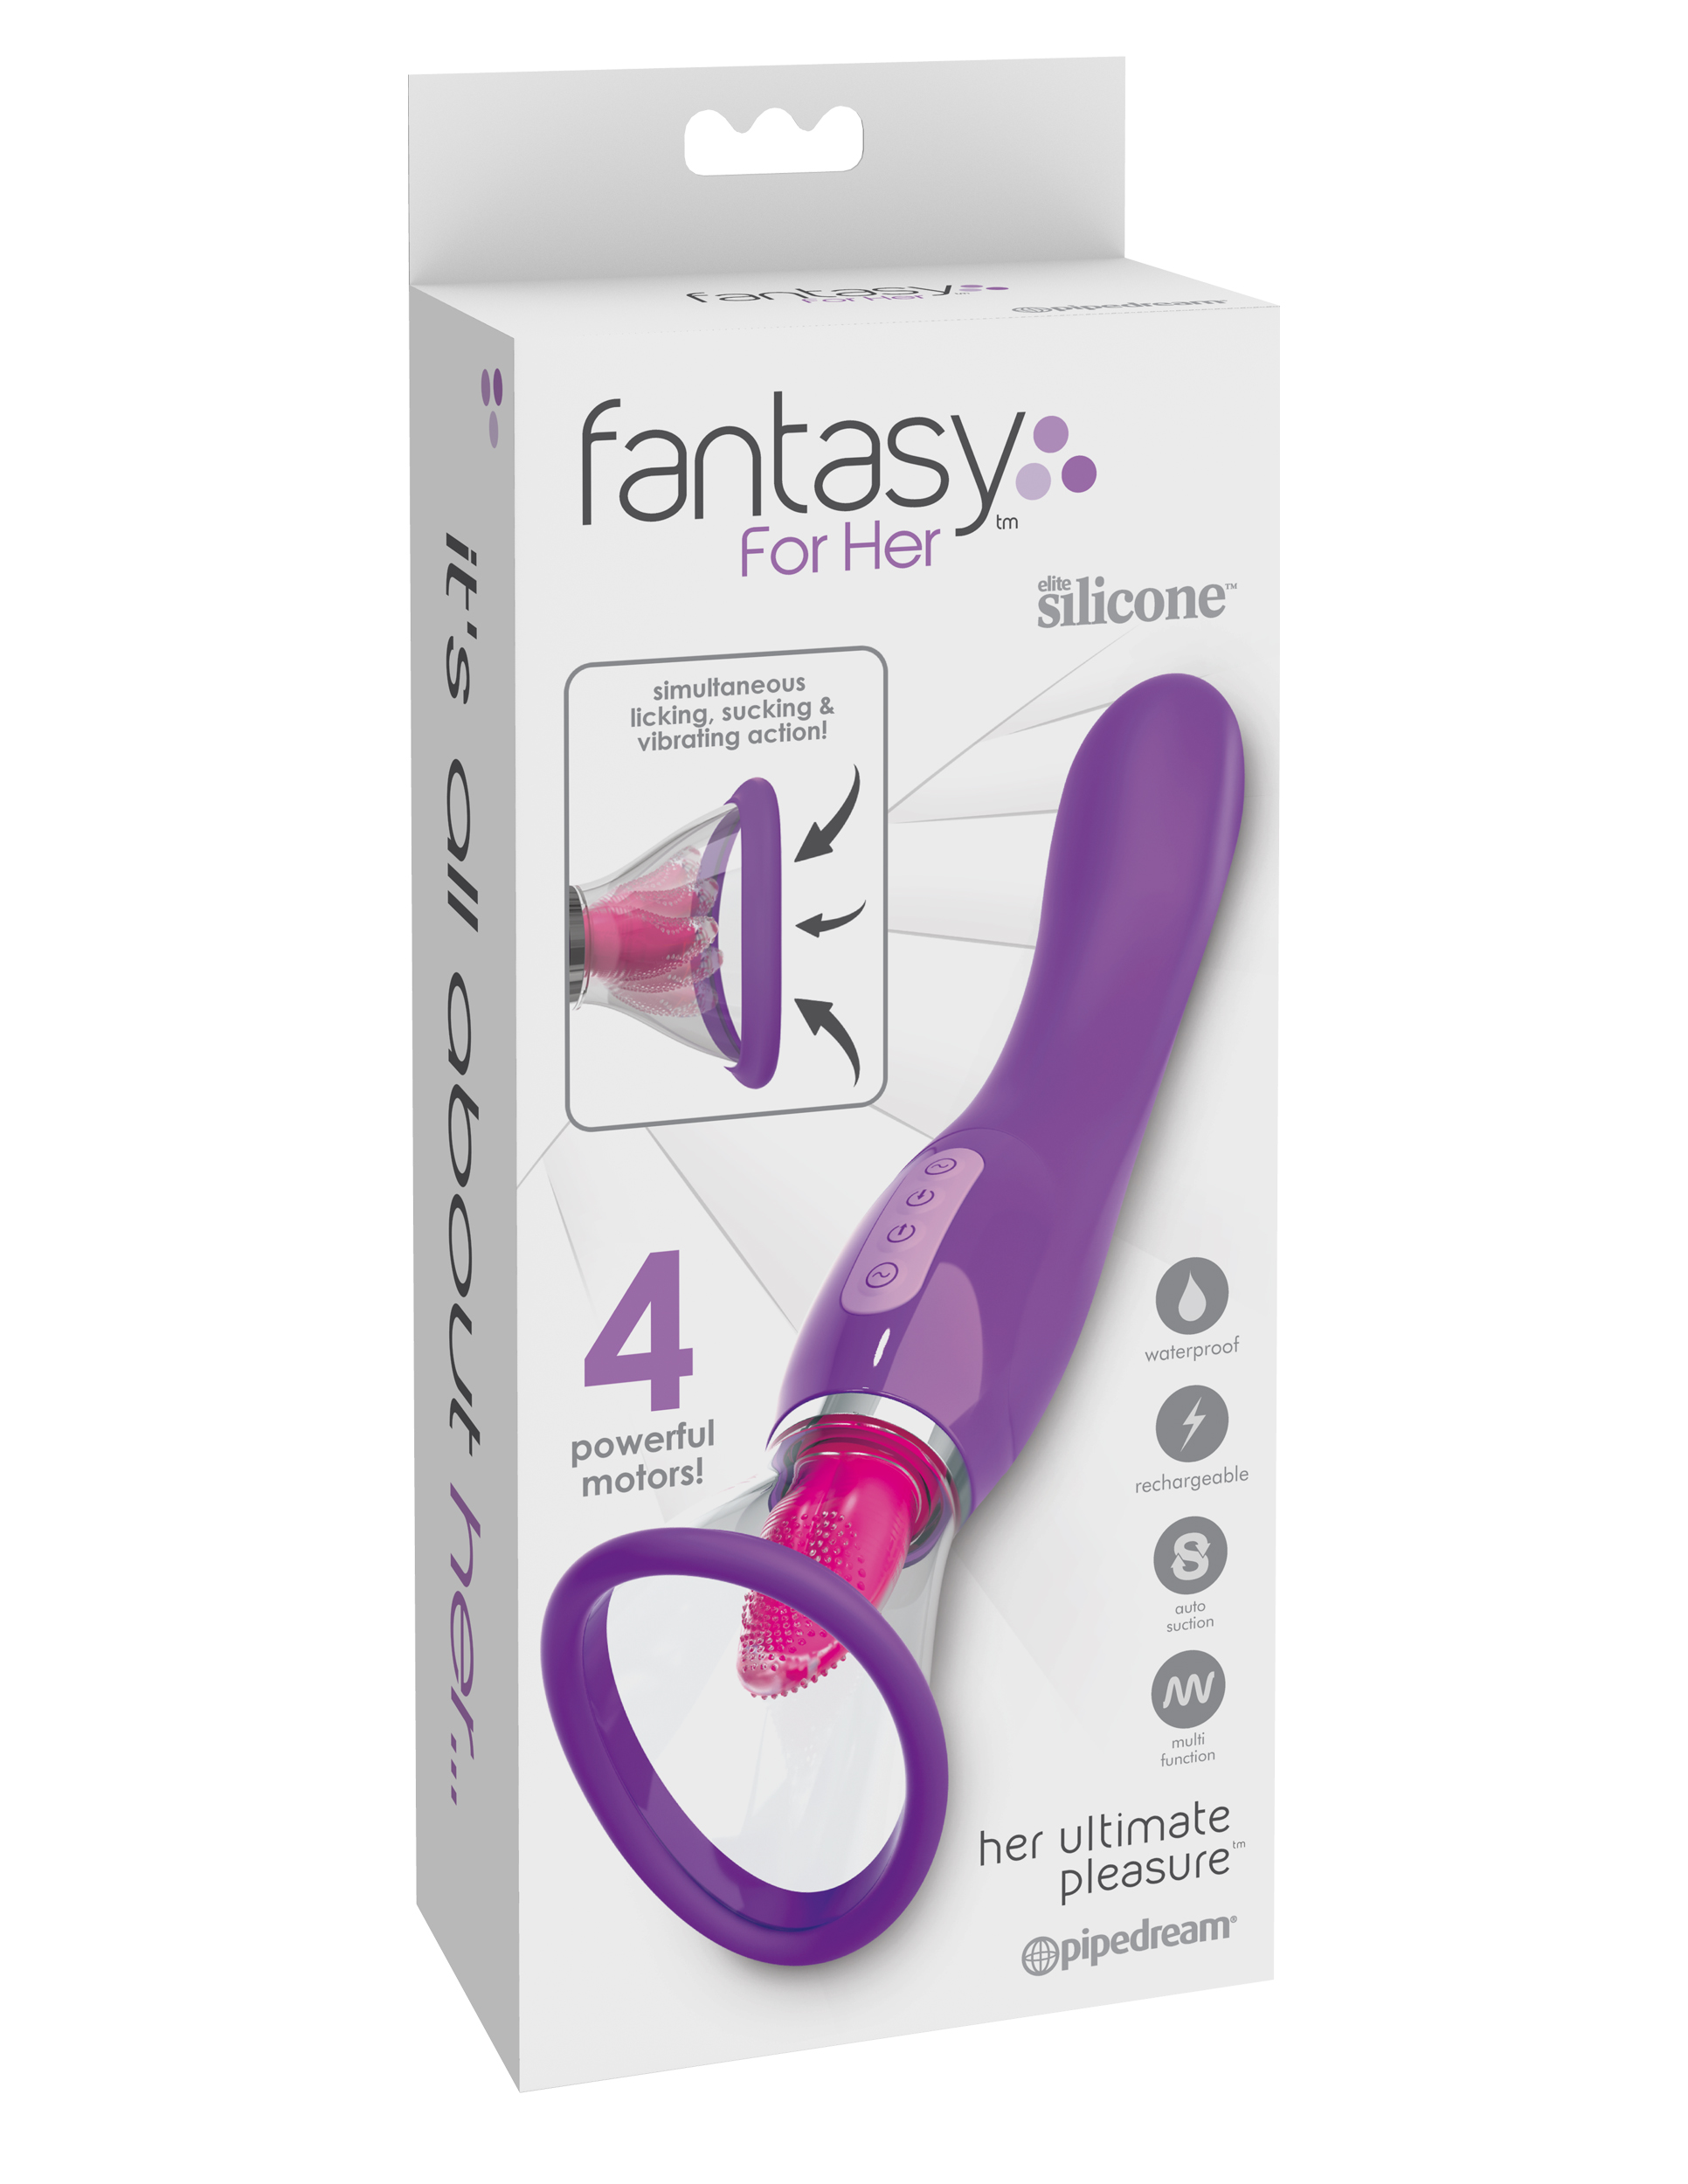 FANTASY FOR HER HER ULTIMATE PLEASURE 